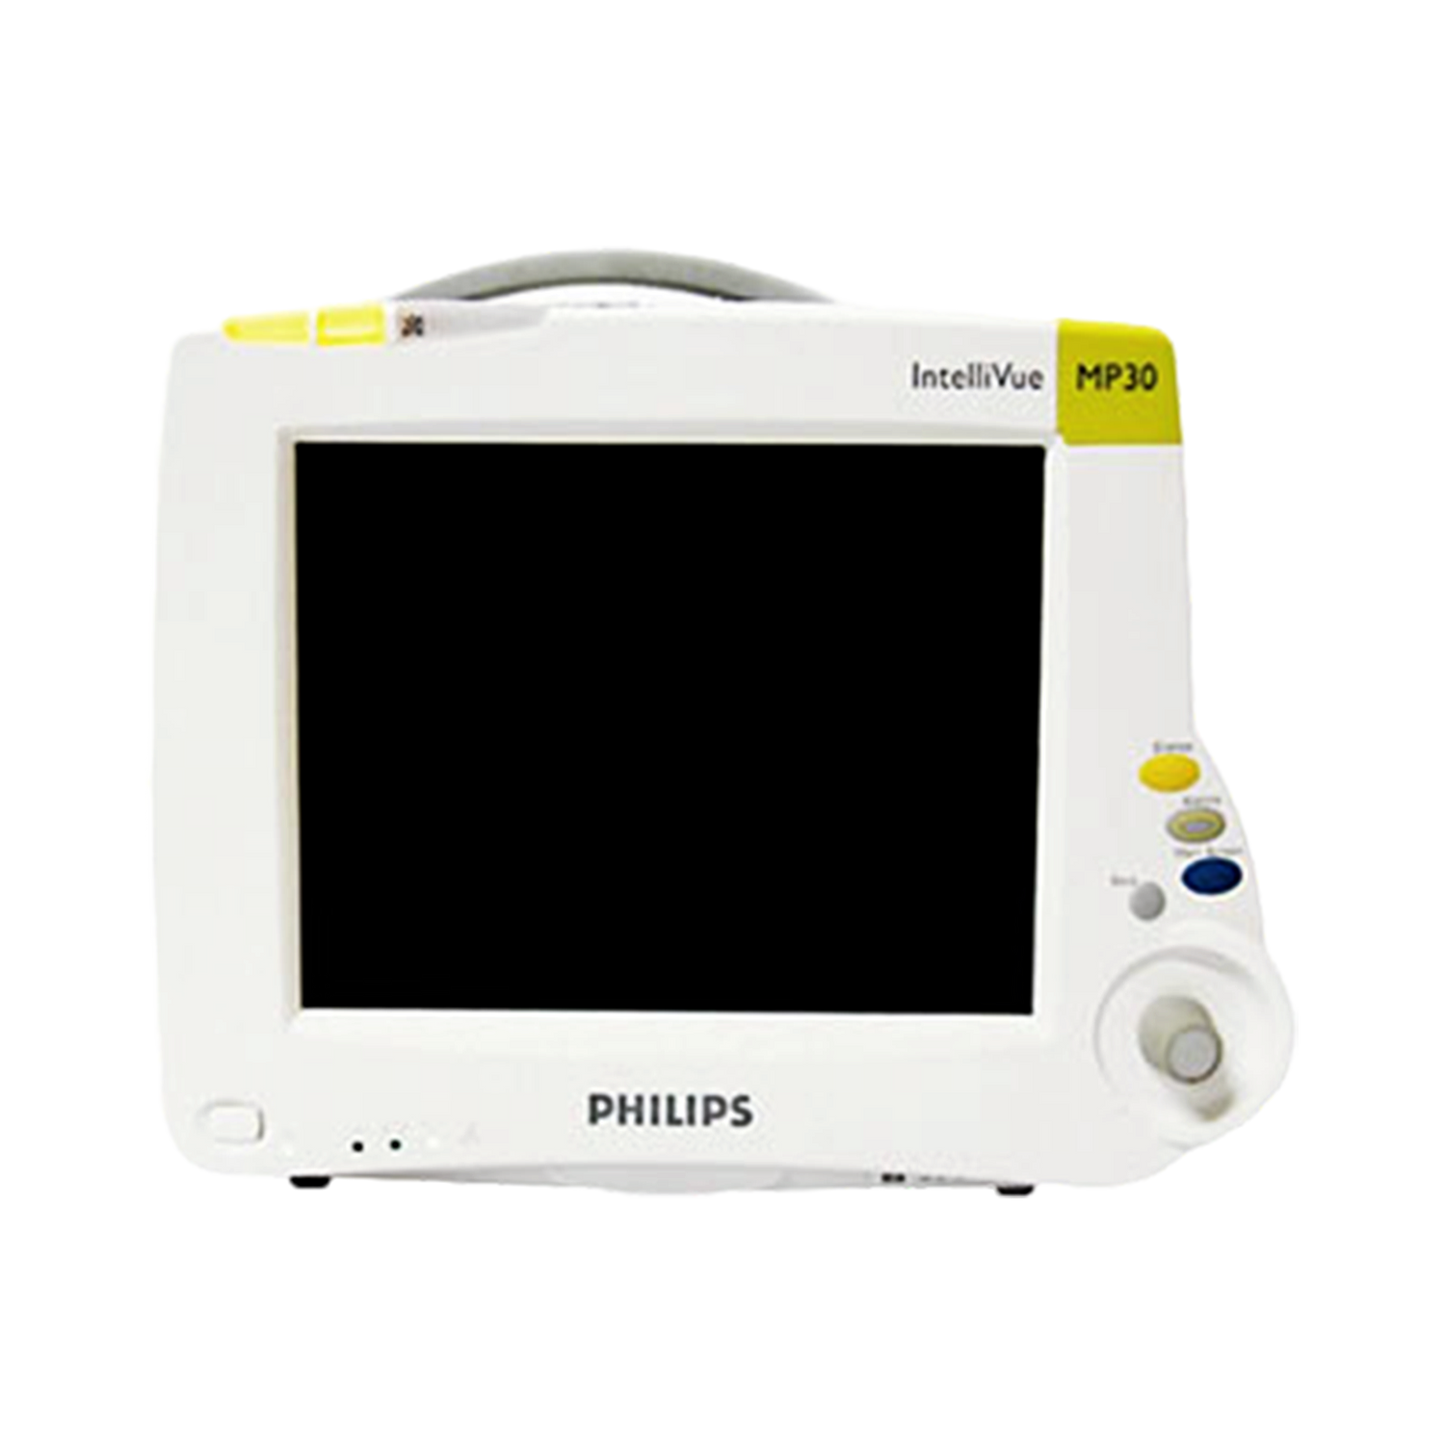 Philips Intellivue MP30 M8002A Patient Monitor